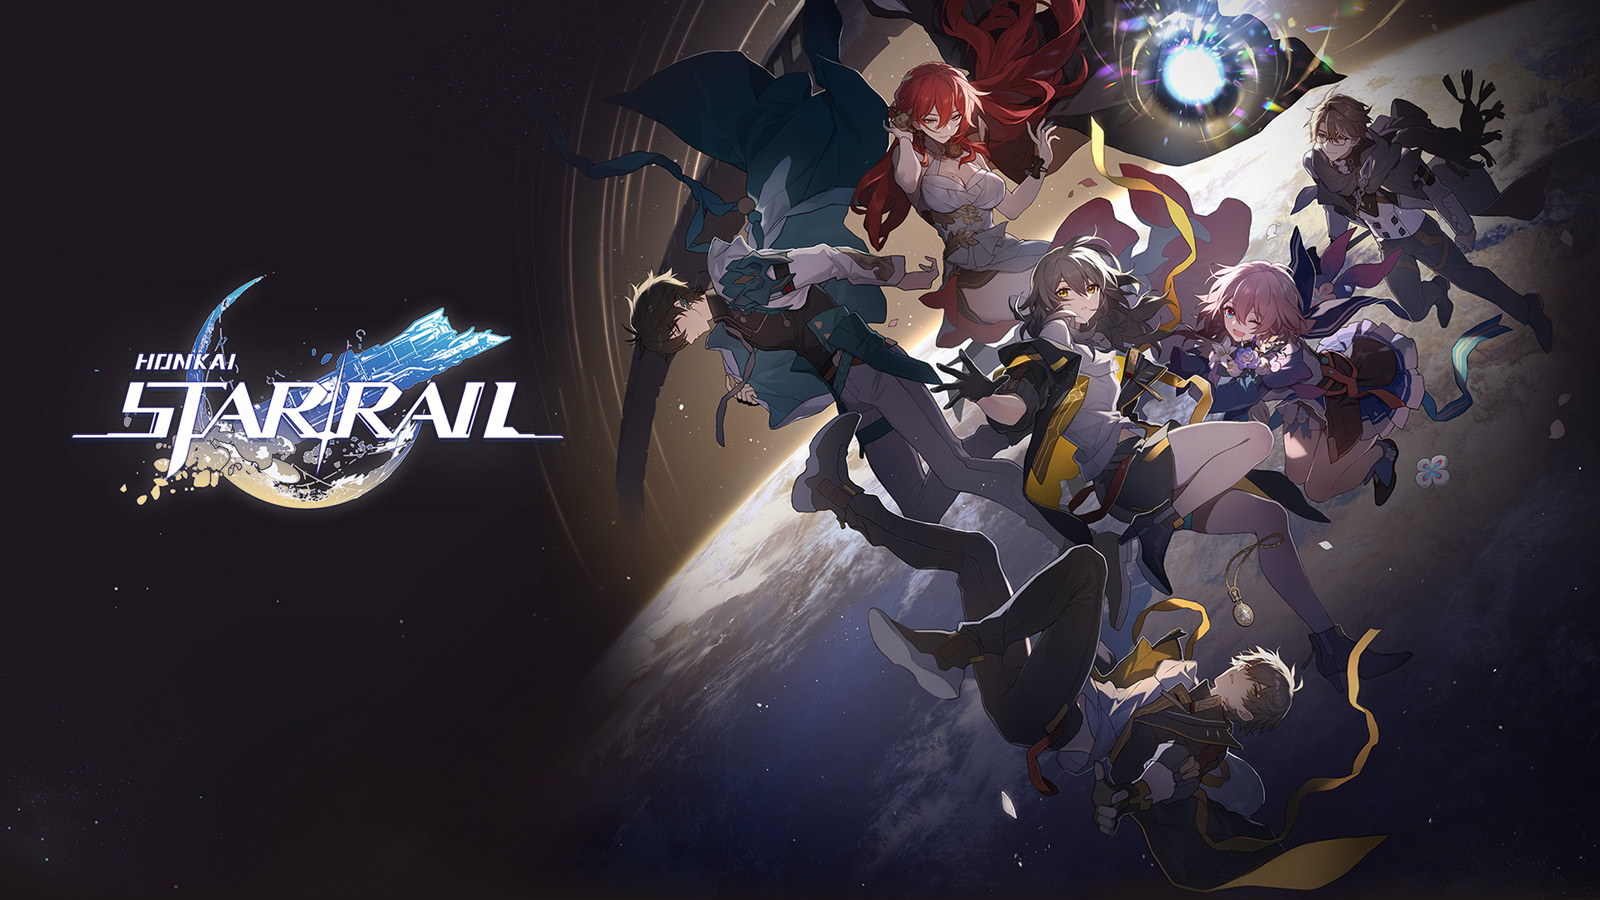 Honkai Star Rail pre-installation guide: How to pre-load new HoYoverse game  before release